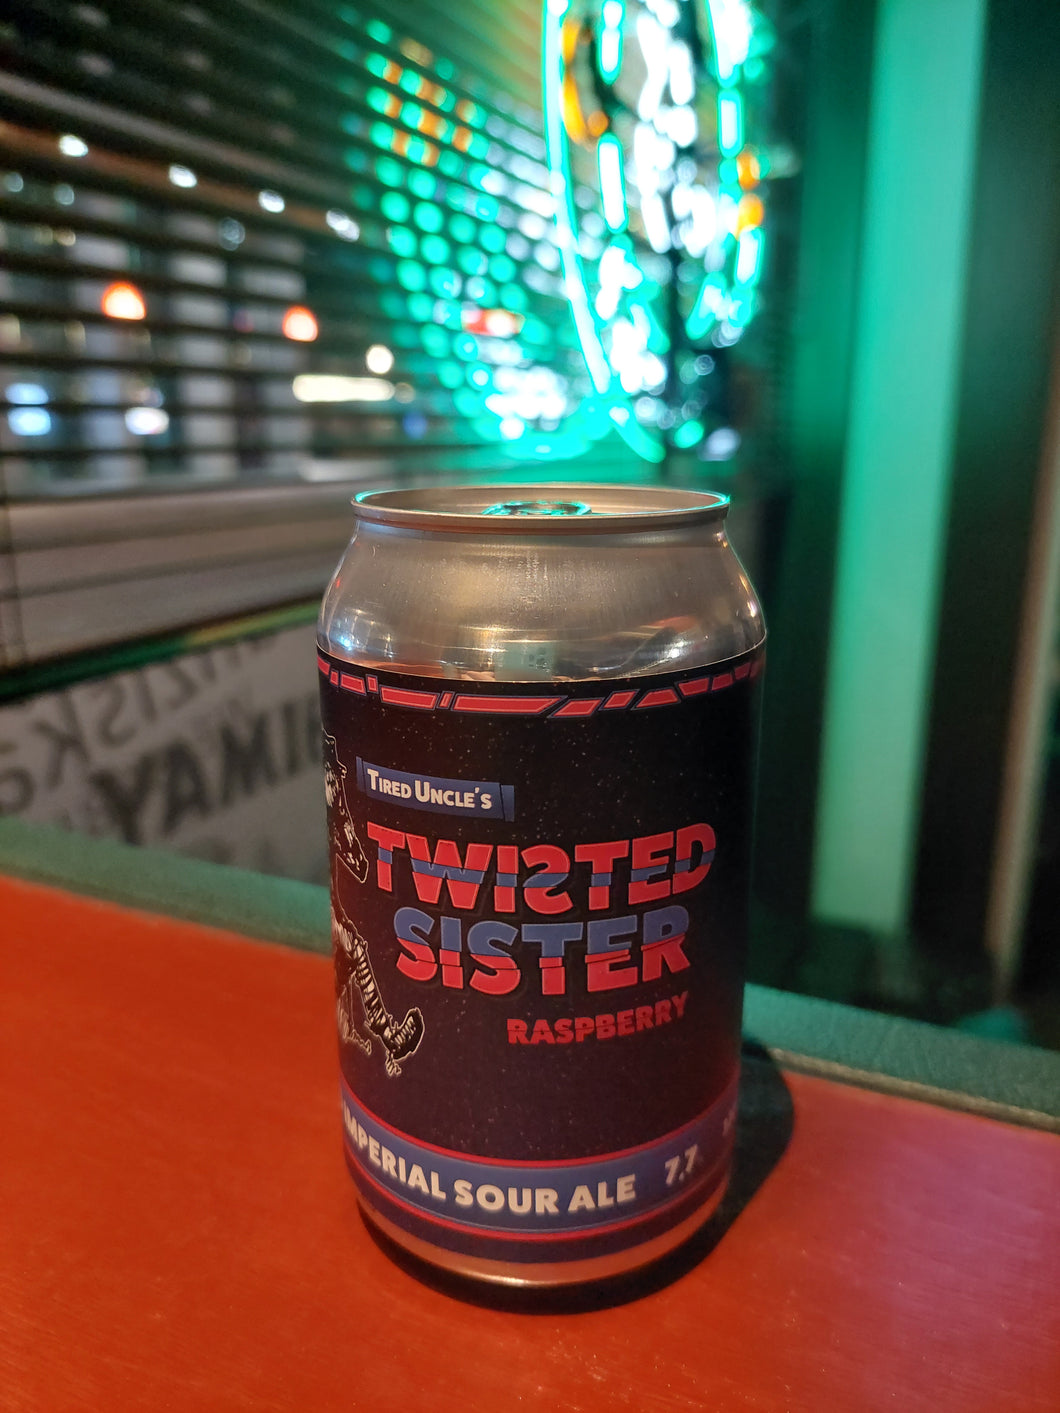 Tired Uncle Twisted Sister Raspberry